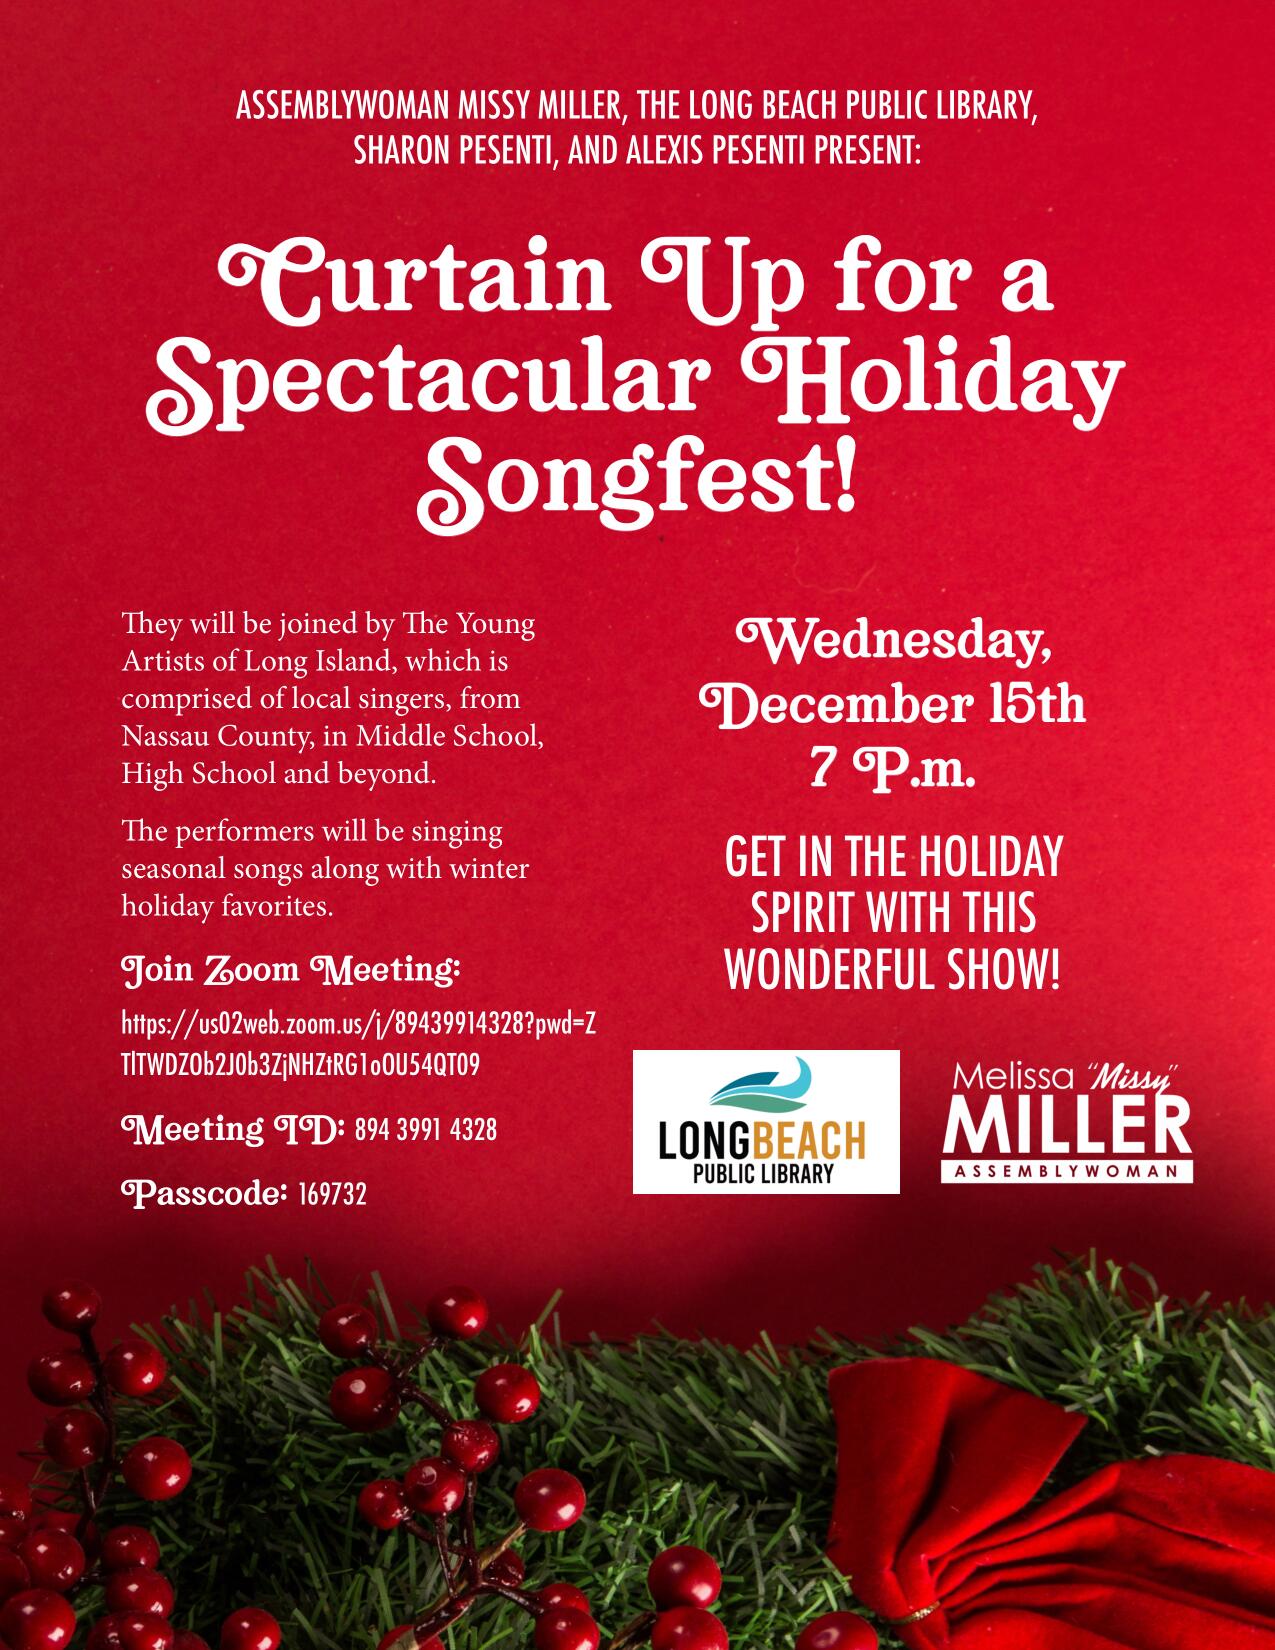 Assemblywoman Missy Miller's Spectacular Holiday Songfest Flyer 